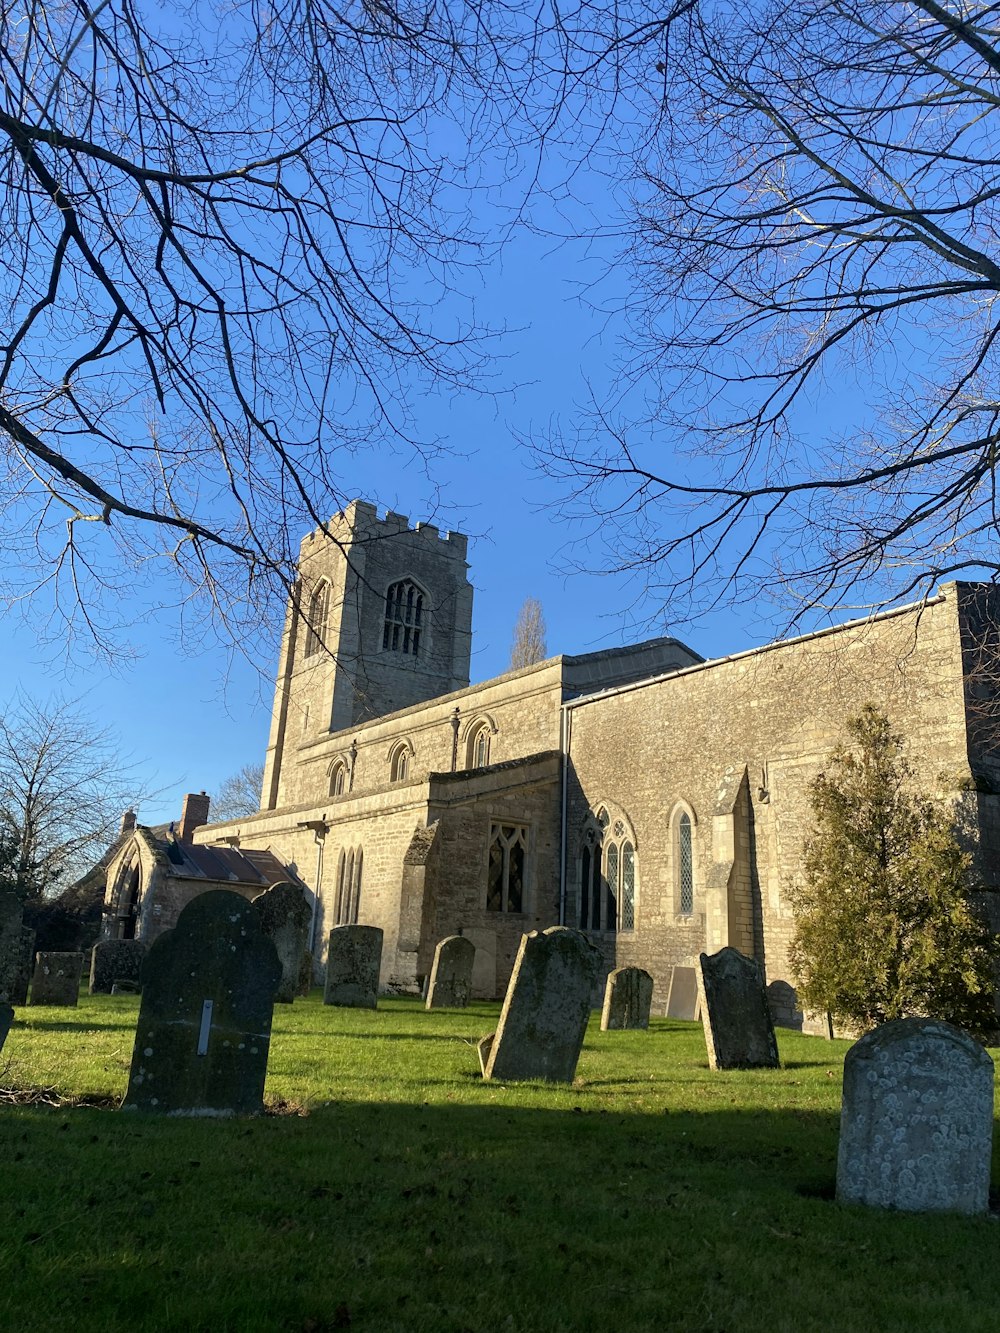 an old church with a graveyard in the foreground